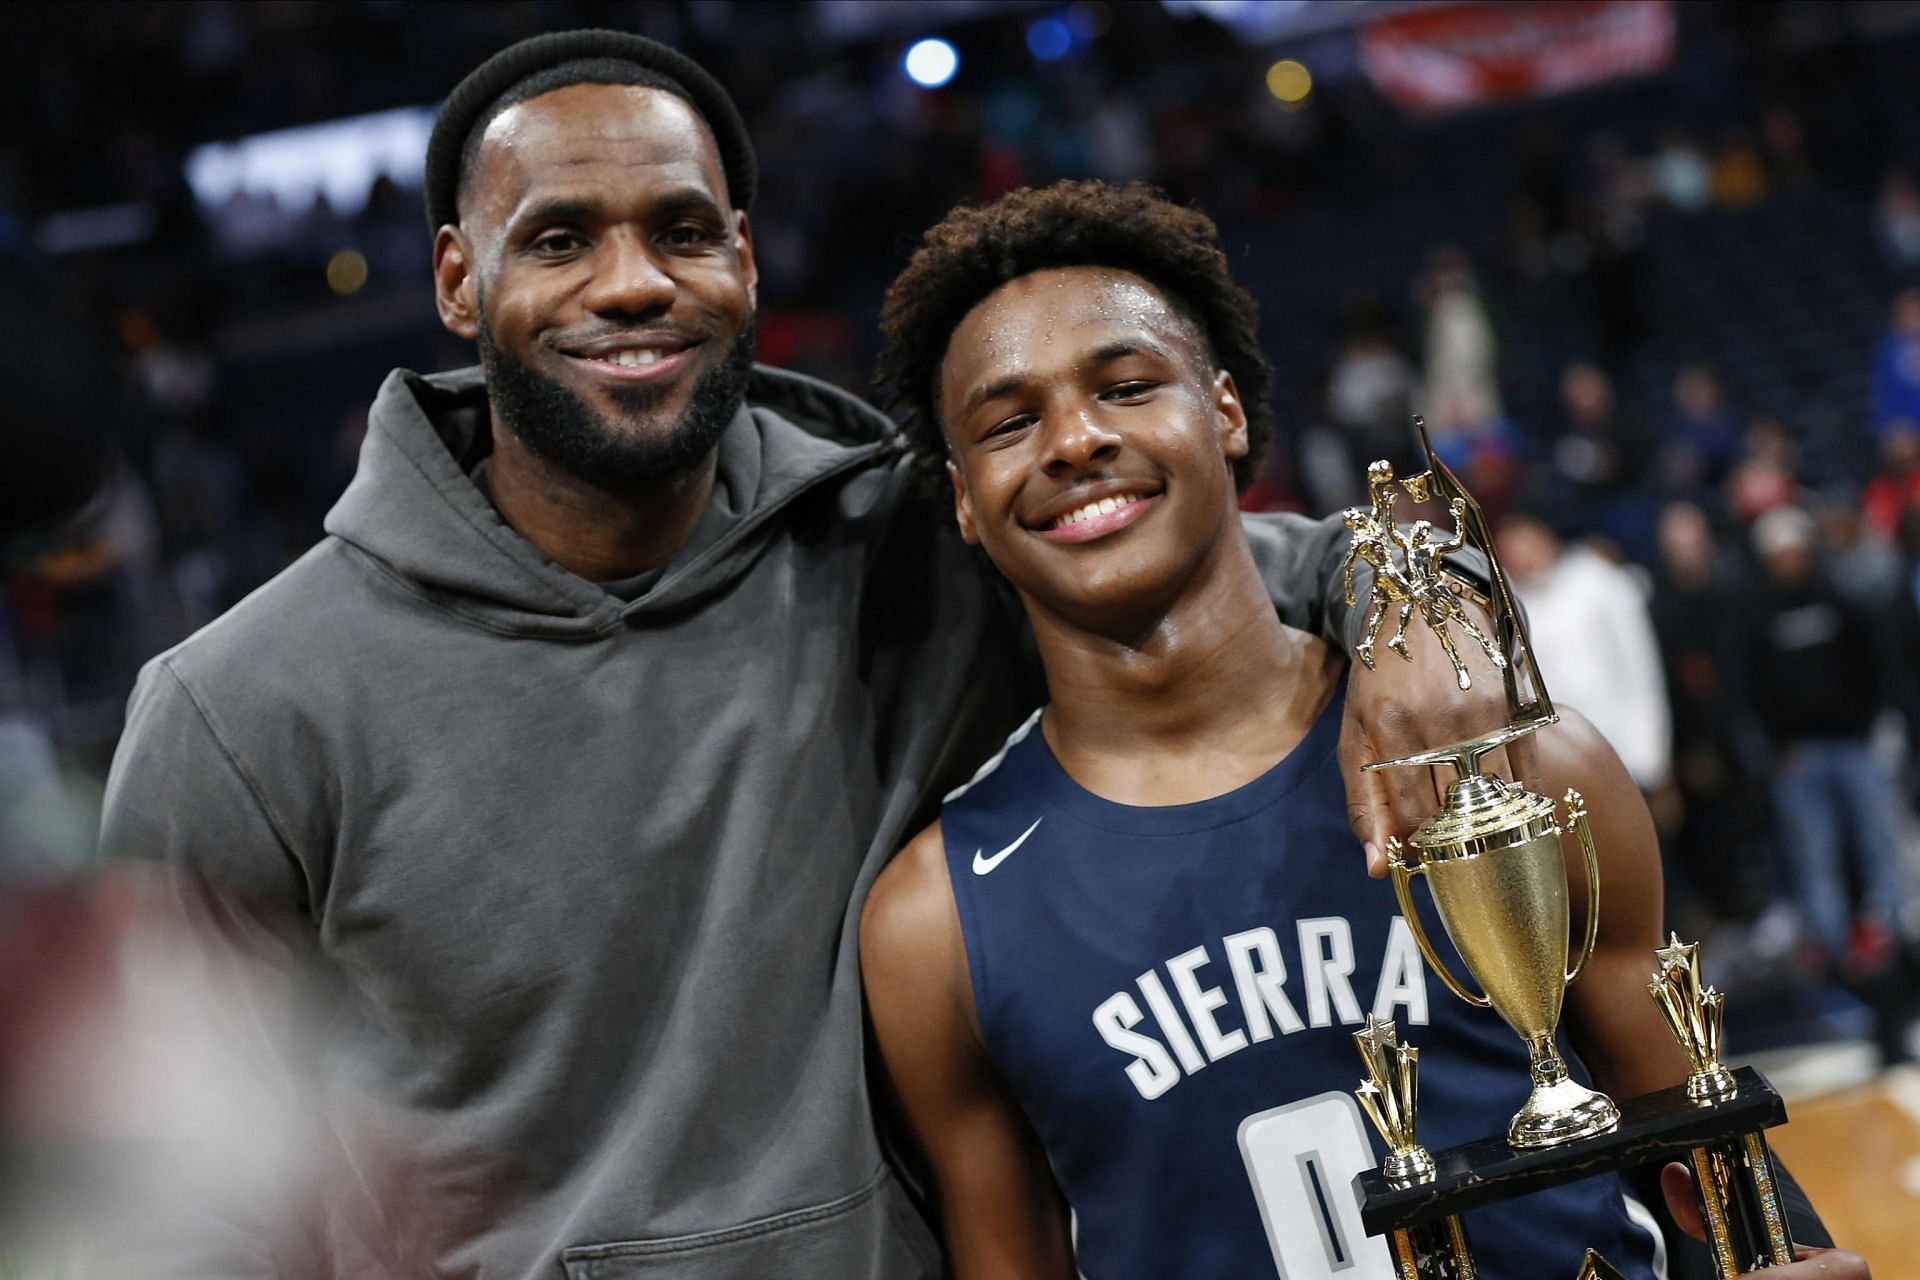 Winning titles and playing with Bronny James are LeBron James biggest motivations moving forward. [Photo: Bleacher Report]